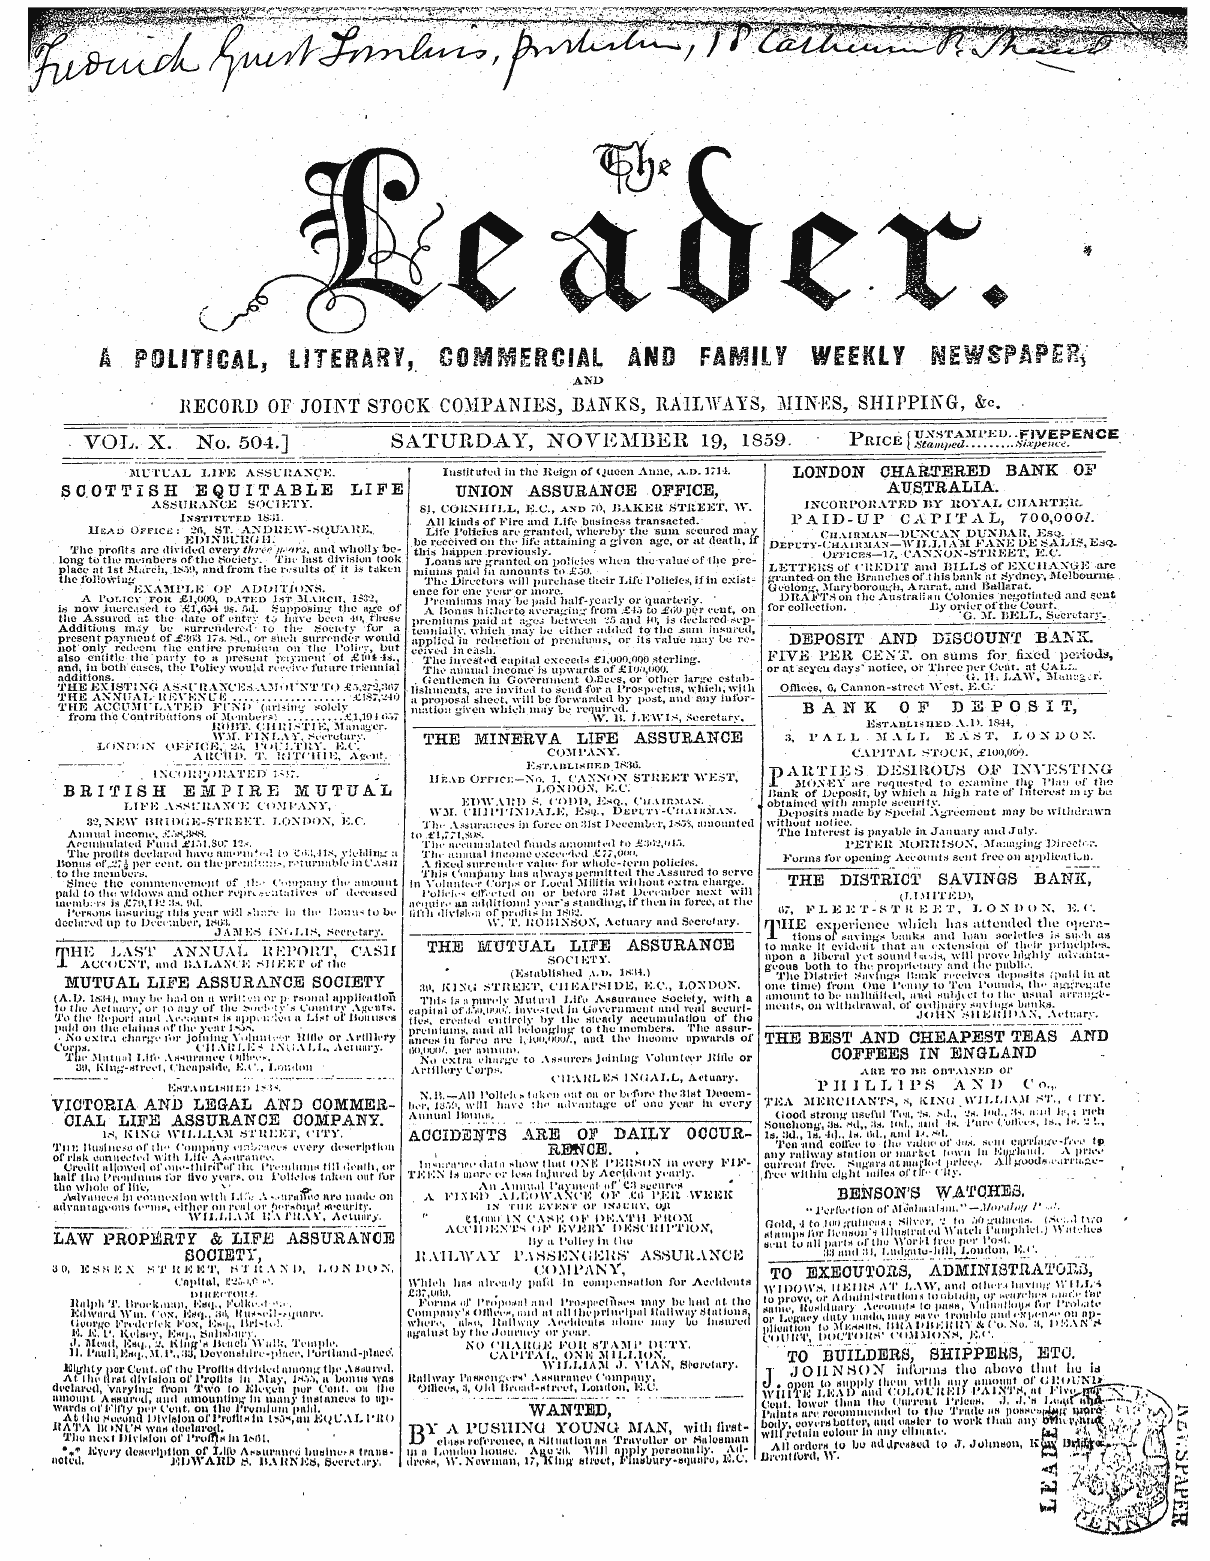 Leader (1850-1860): jS F Y, 2nd edition - Ad00112